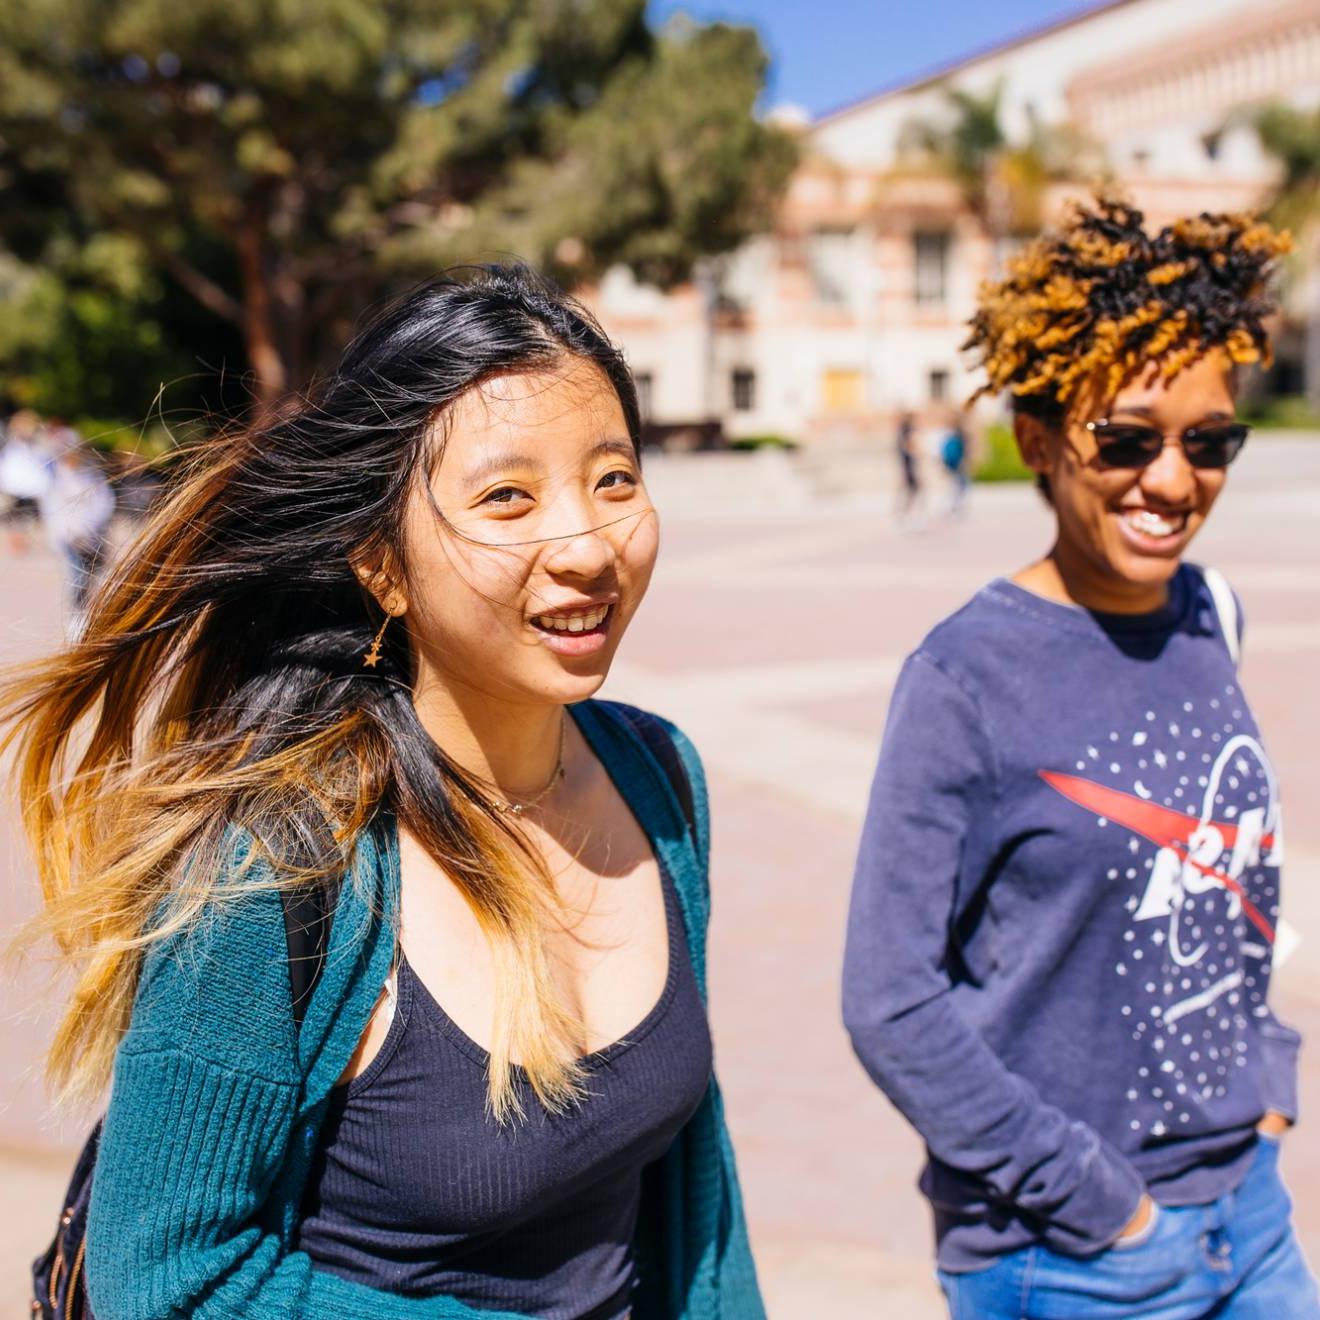 A young Black woman with a NASA sweatshirt and a young Asian woman with a green cardigan walk along a campus smiling